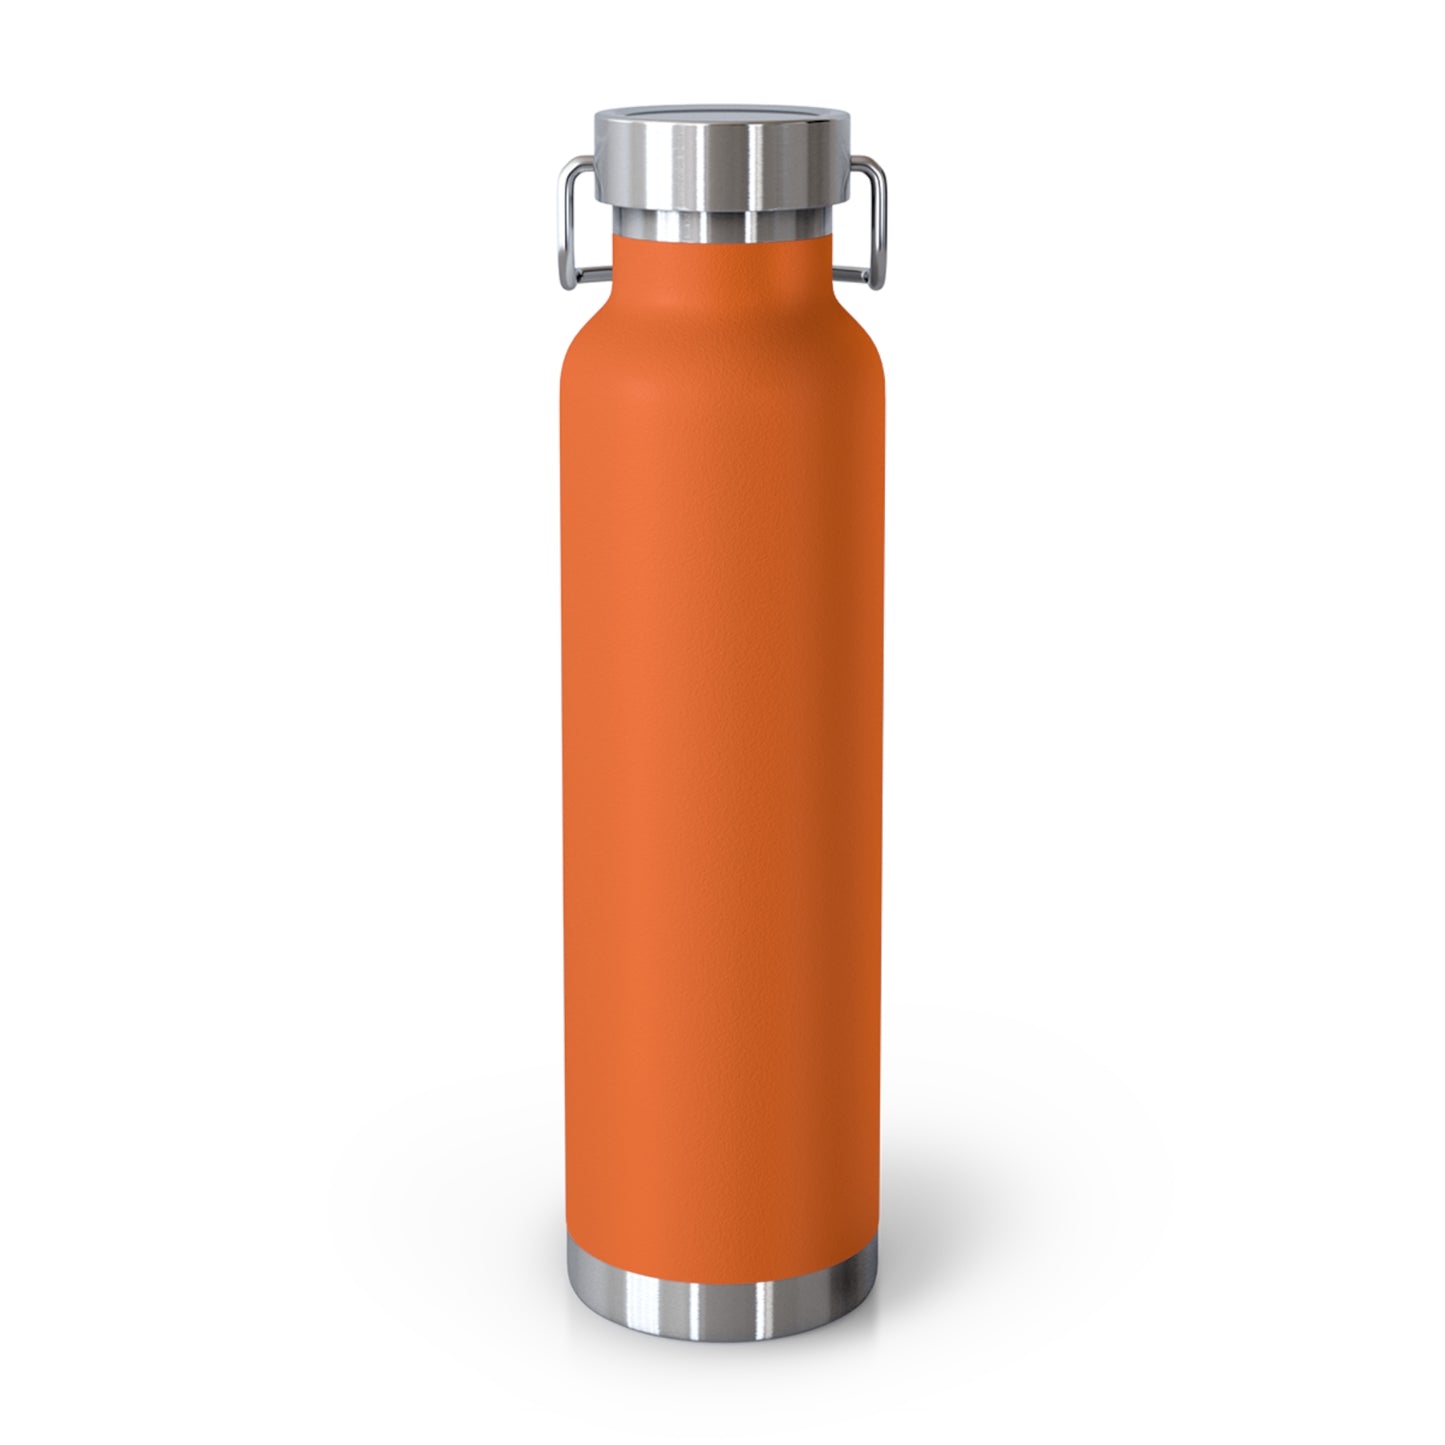 Copper Vacuum Insulated Bottle, 22oz (My Other Ride)